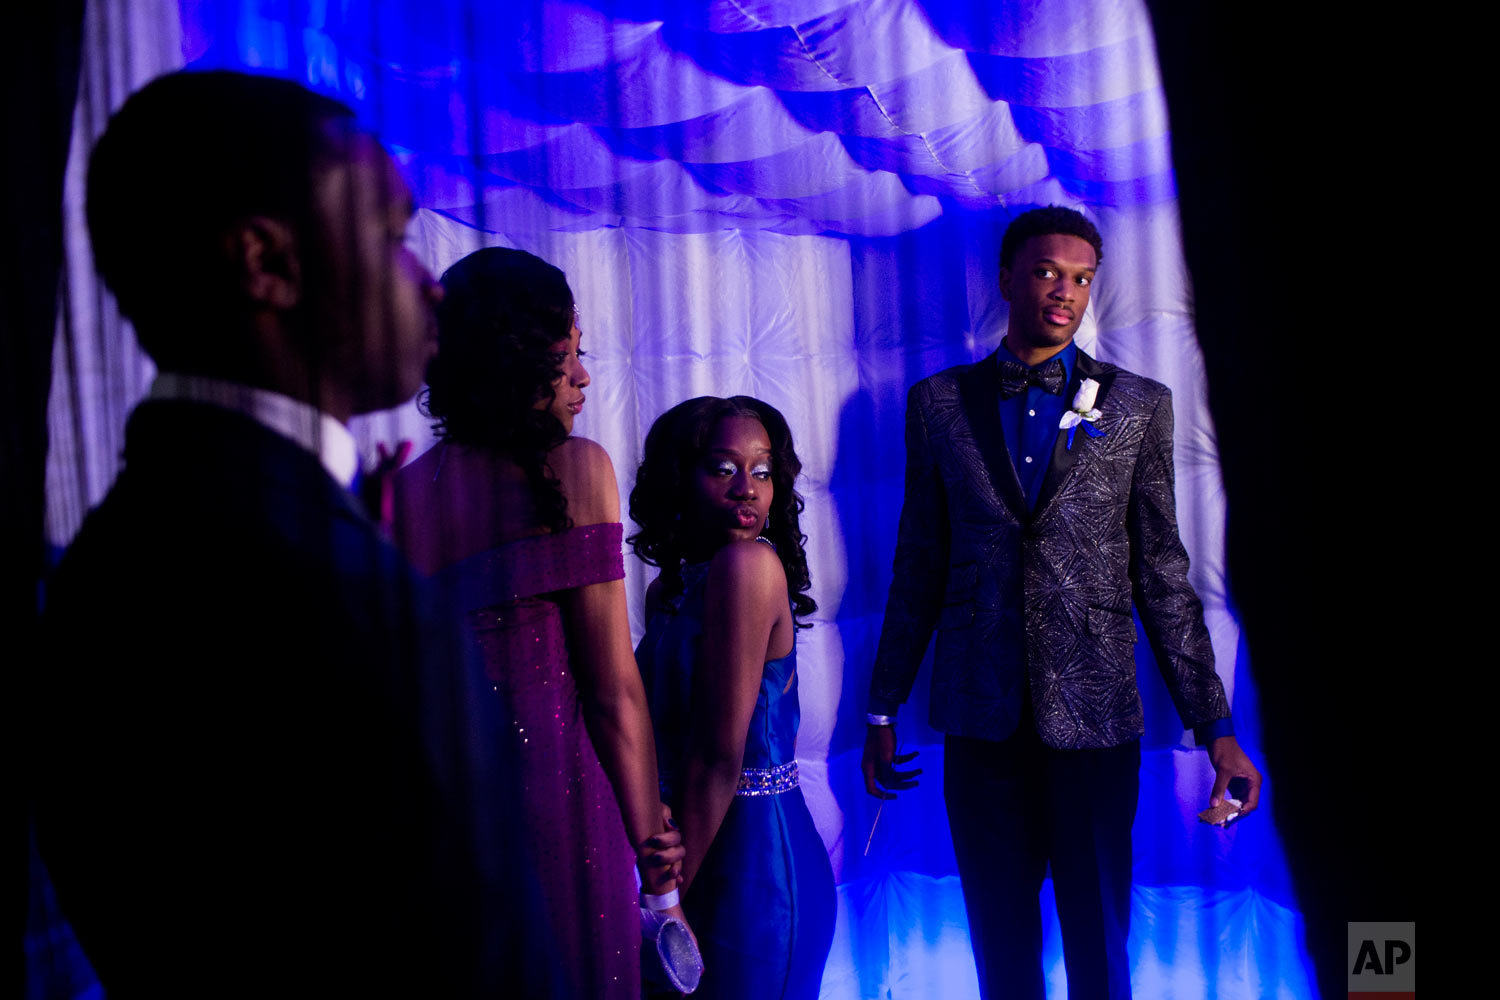  Swartz Creek seniors Yasminae Holmes, second from left, and Jada Hall pose for a photo booth camera as their dates Anthony Roberts, left, a Swartz Creek senior, and Chris Long, a Beecher senior, watch while attending the Swartz Creek High School pro